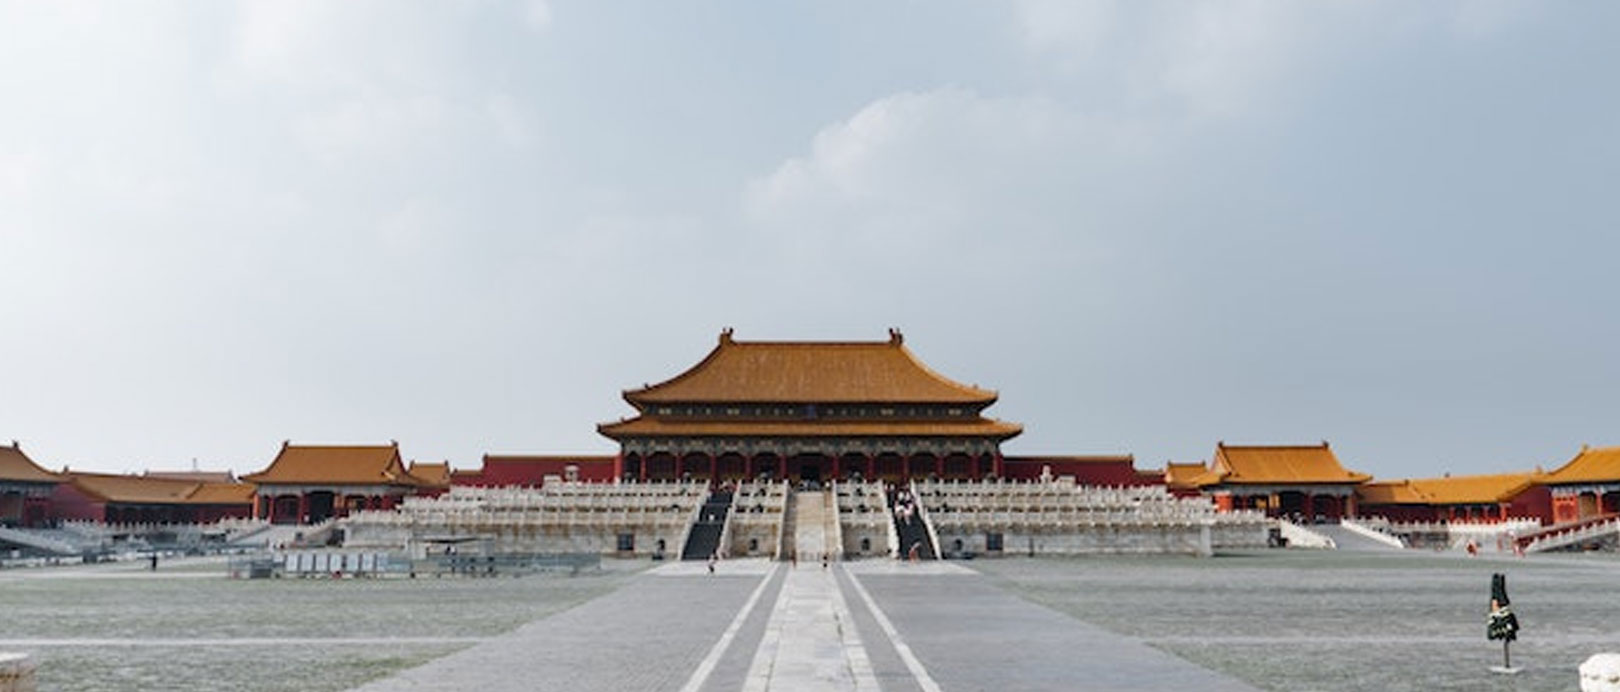 The Forbidden City: The medieval centre of China's power and